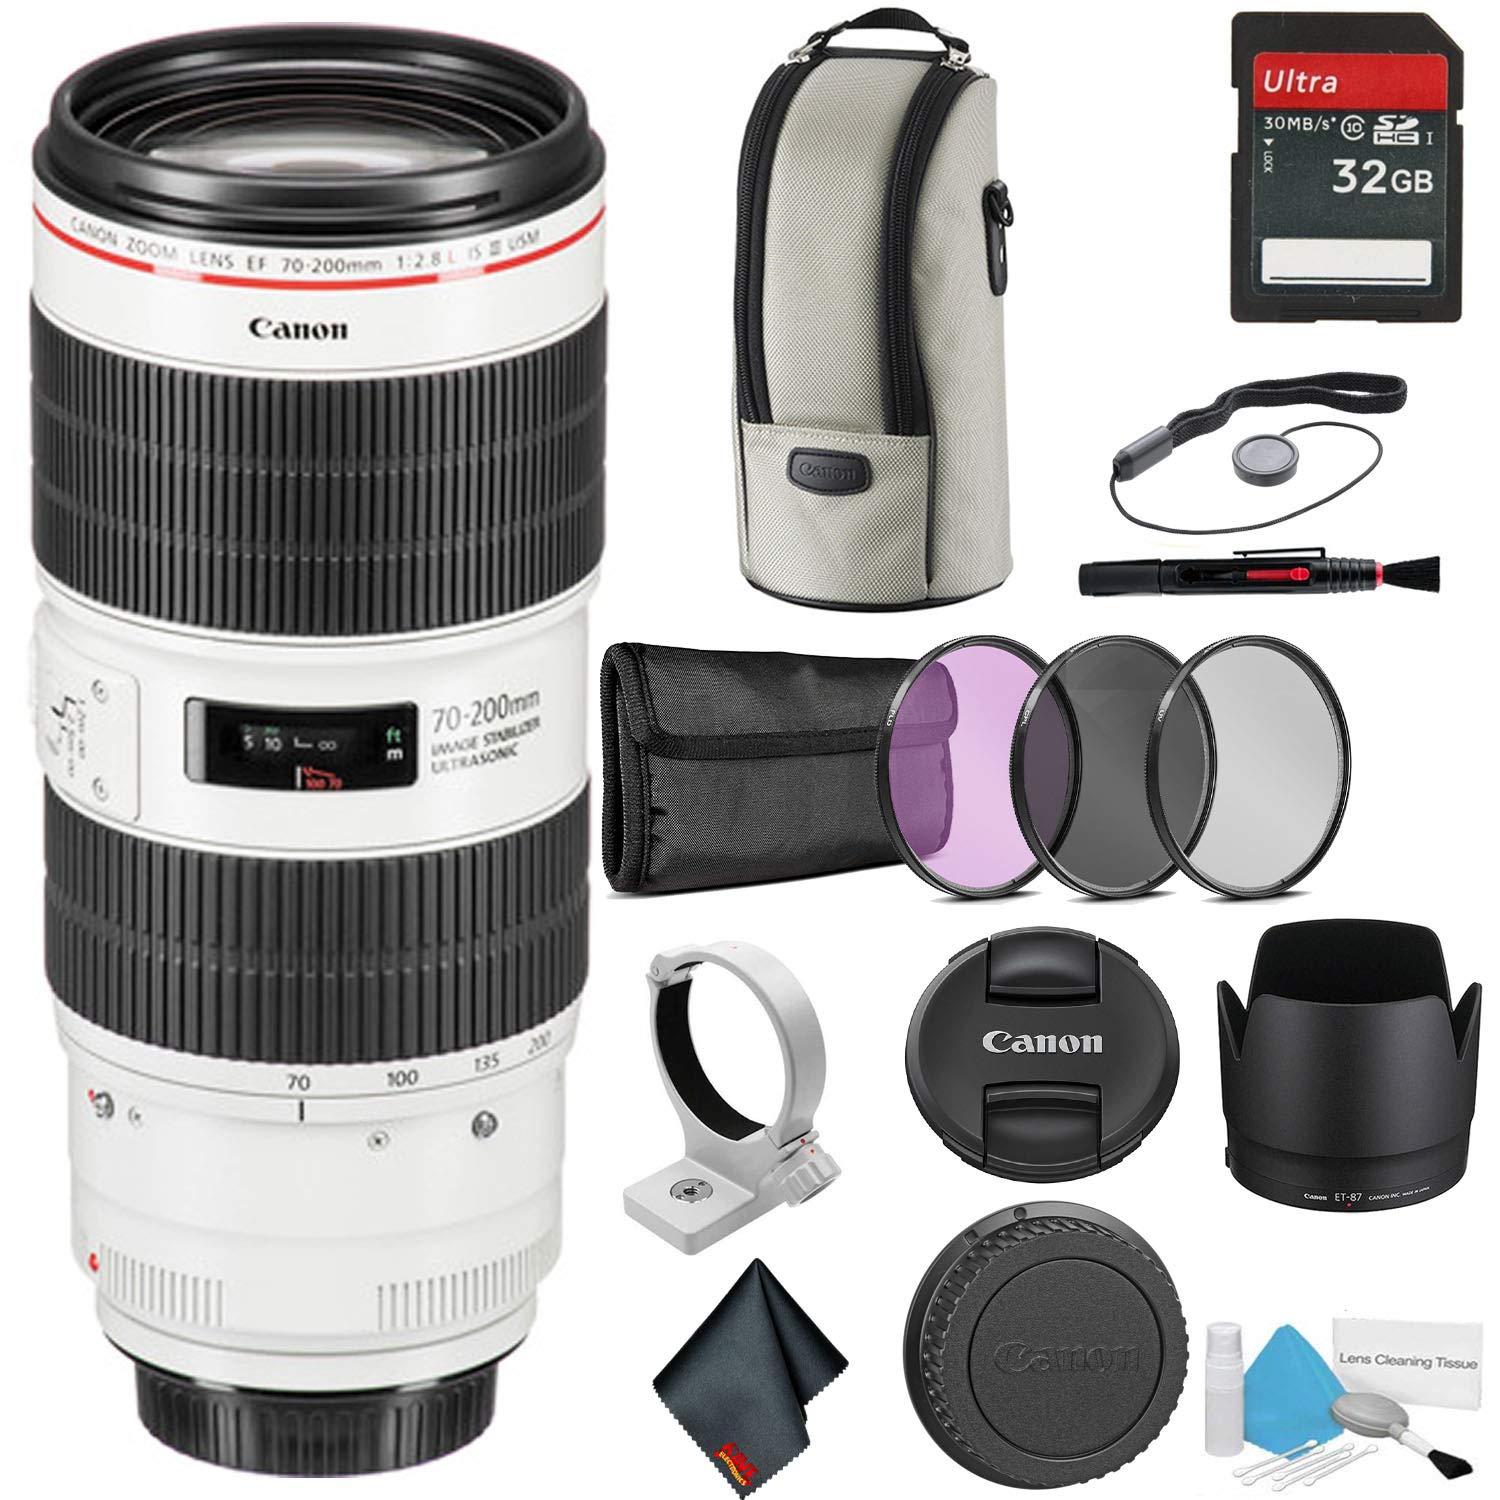 Canon EF 70-200mm f/2.8L is III USM Telephoto Zoom Lens Bundle +32GB Memory Card - image 1 of 6